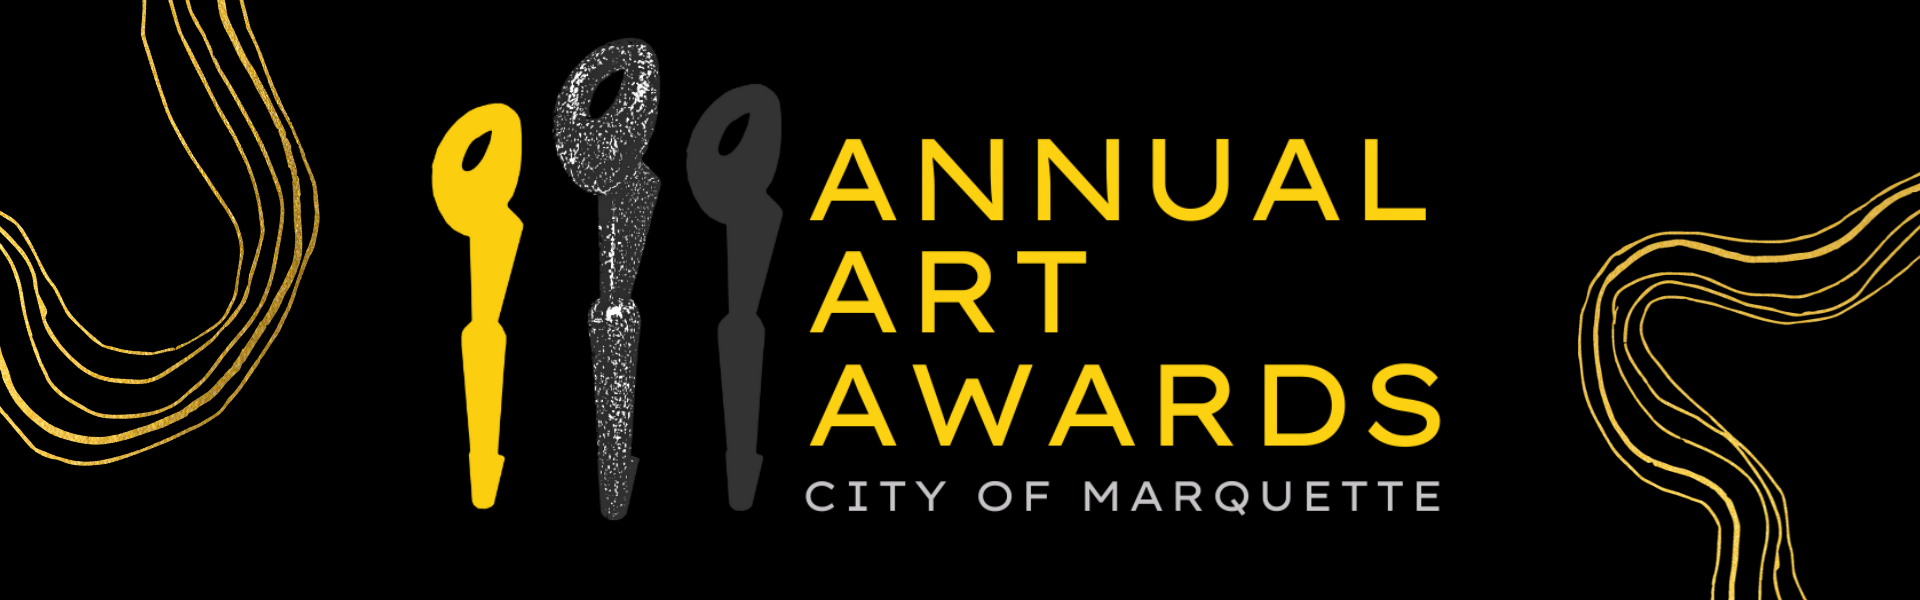 City of Marquette Annual Art Awards